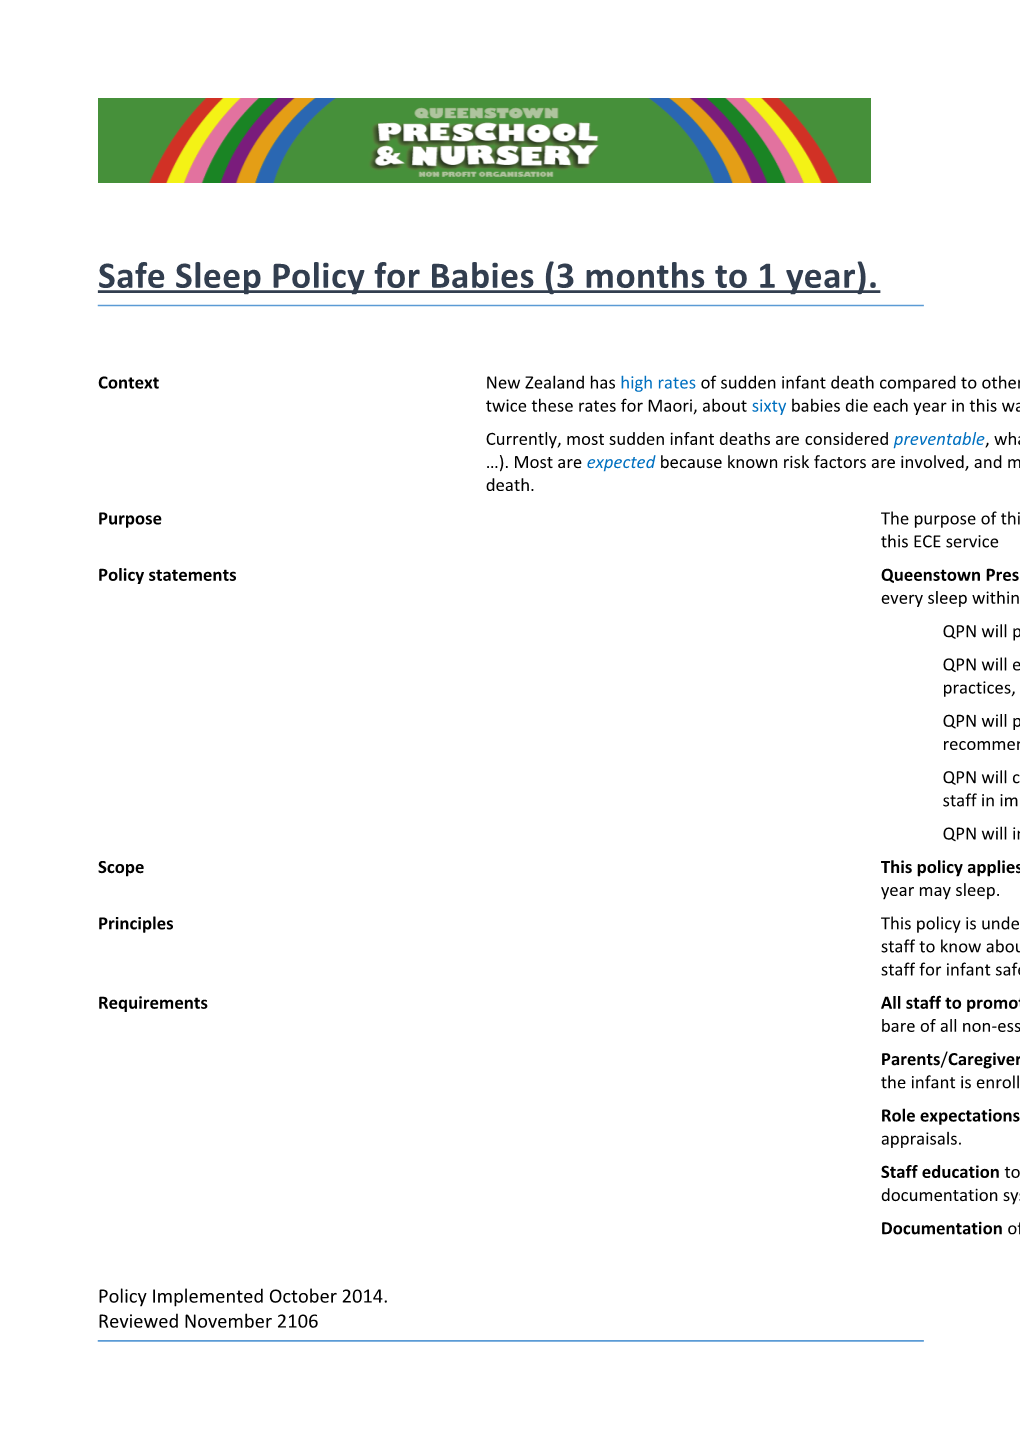 Safe Sleep Policy for Babies (3 Months to 1 Year)